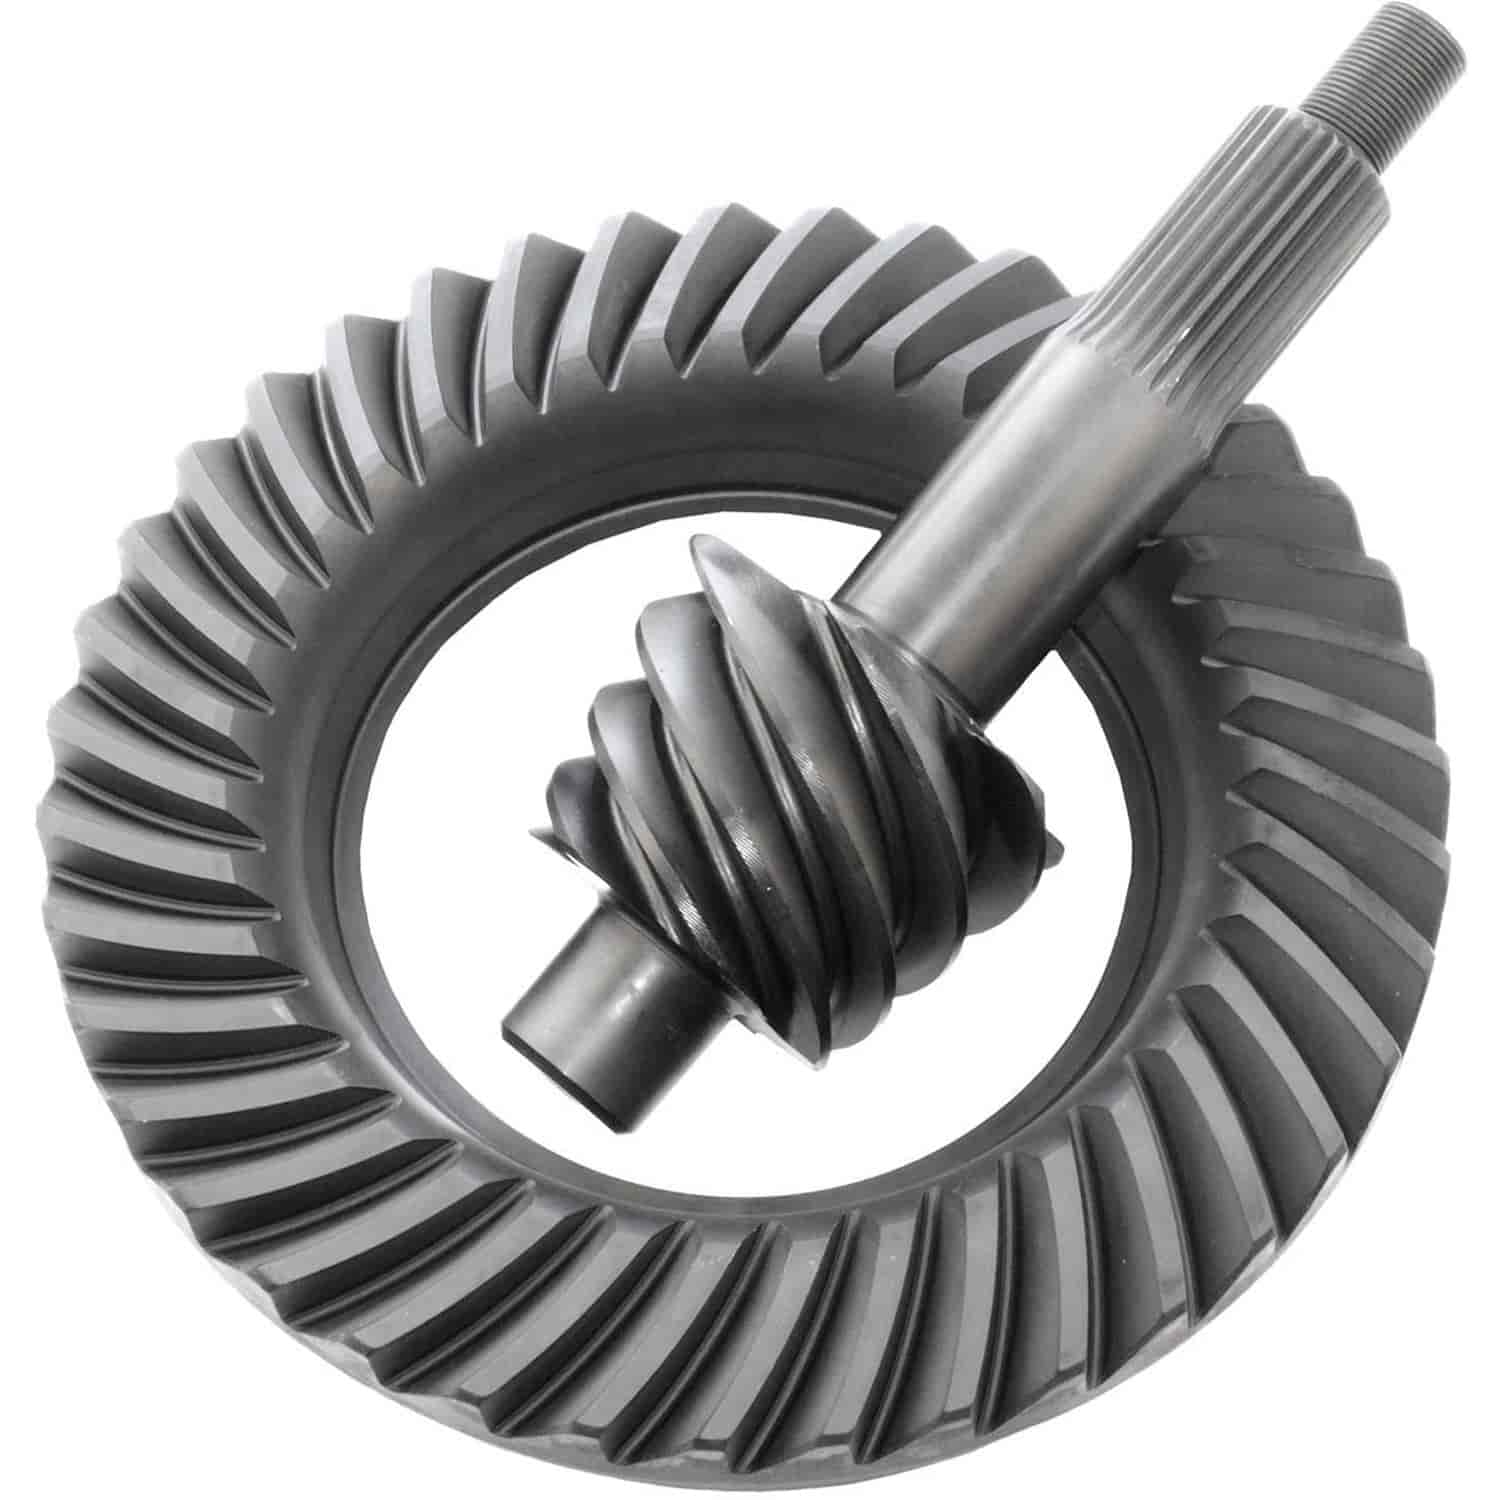 Excel Ring & Pinion Gear Set Ford 9" Ratio: 6.50